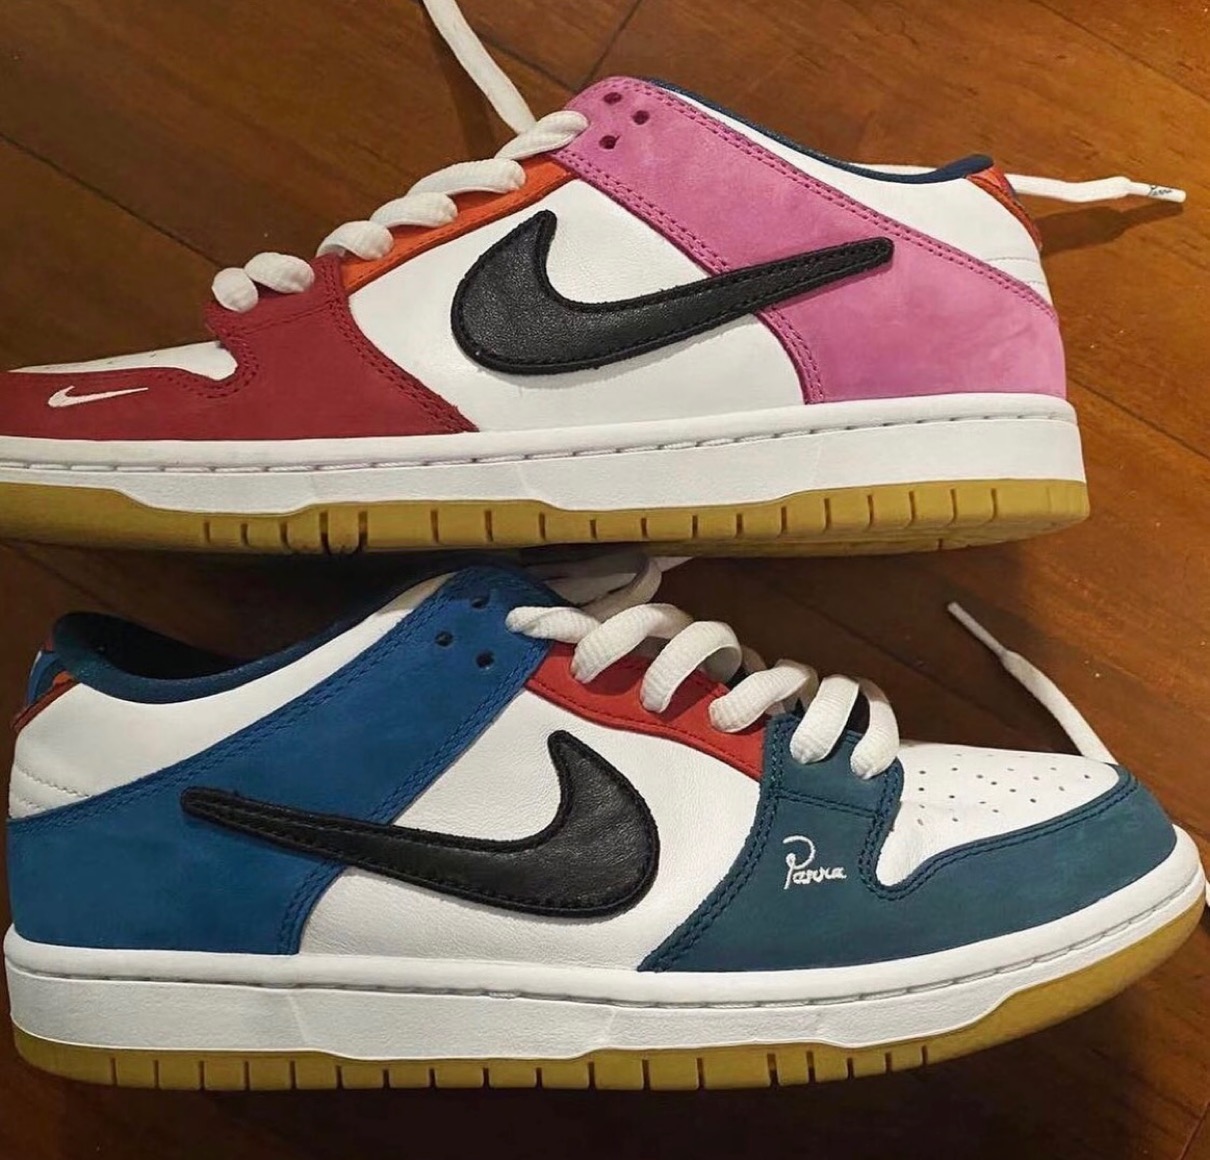 Parra × Nike SB】Dunk Low Pro “Abstract Art”が国内7月29日/7月31日